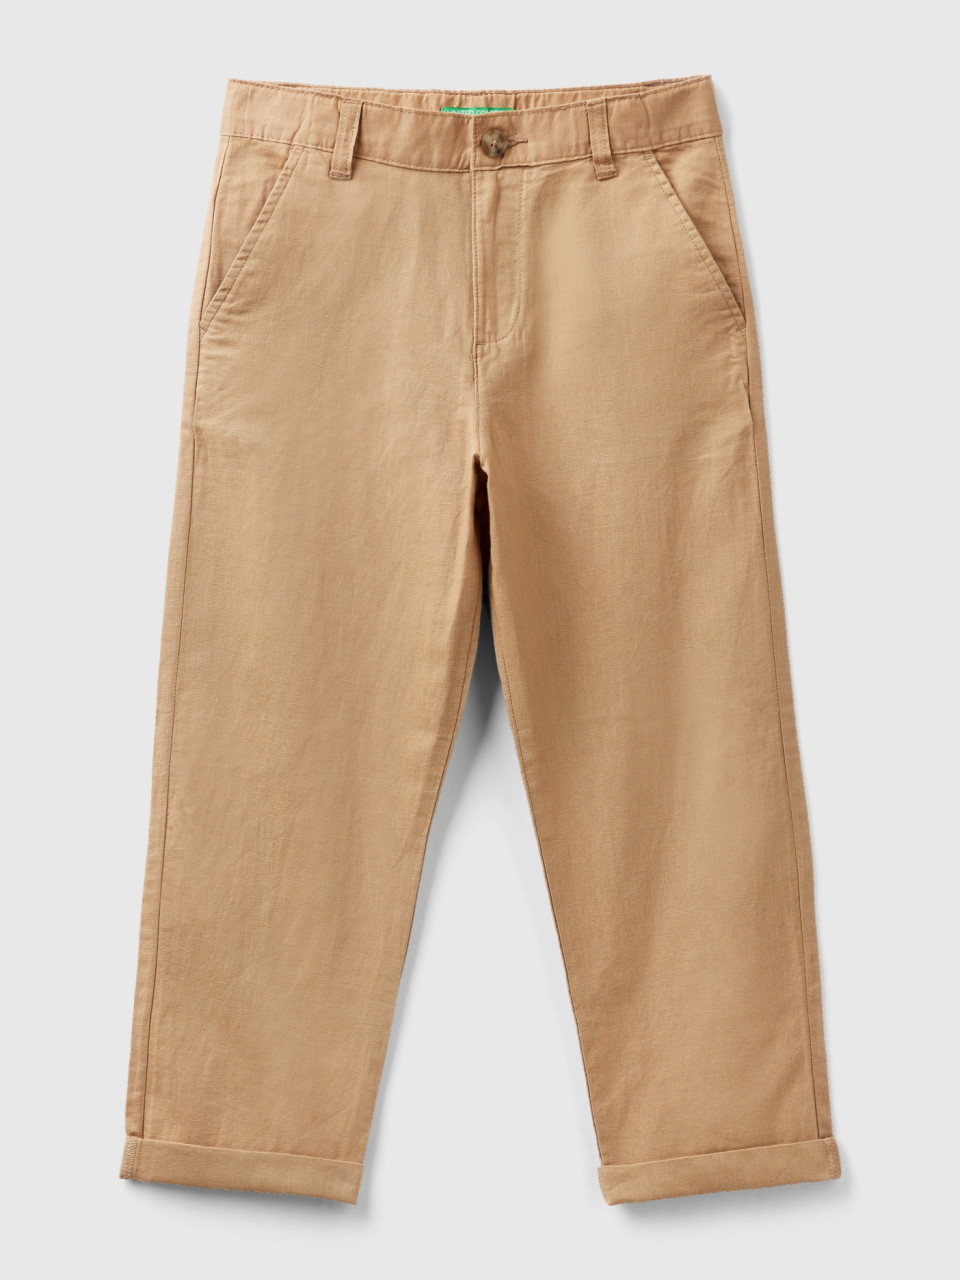 Benetton, Relaxed Fit Trousers In Linen Blend, Camel, Kids